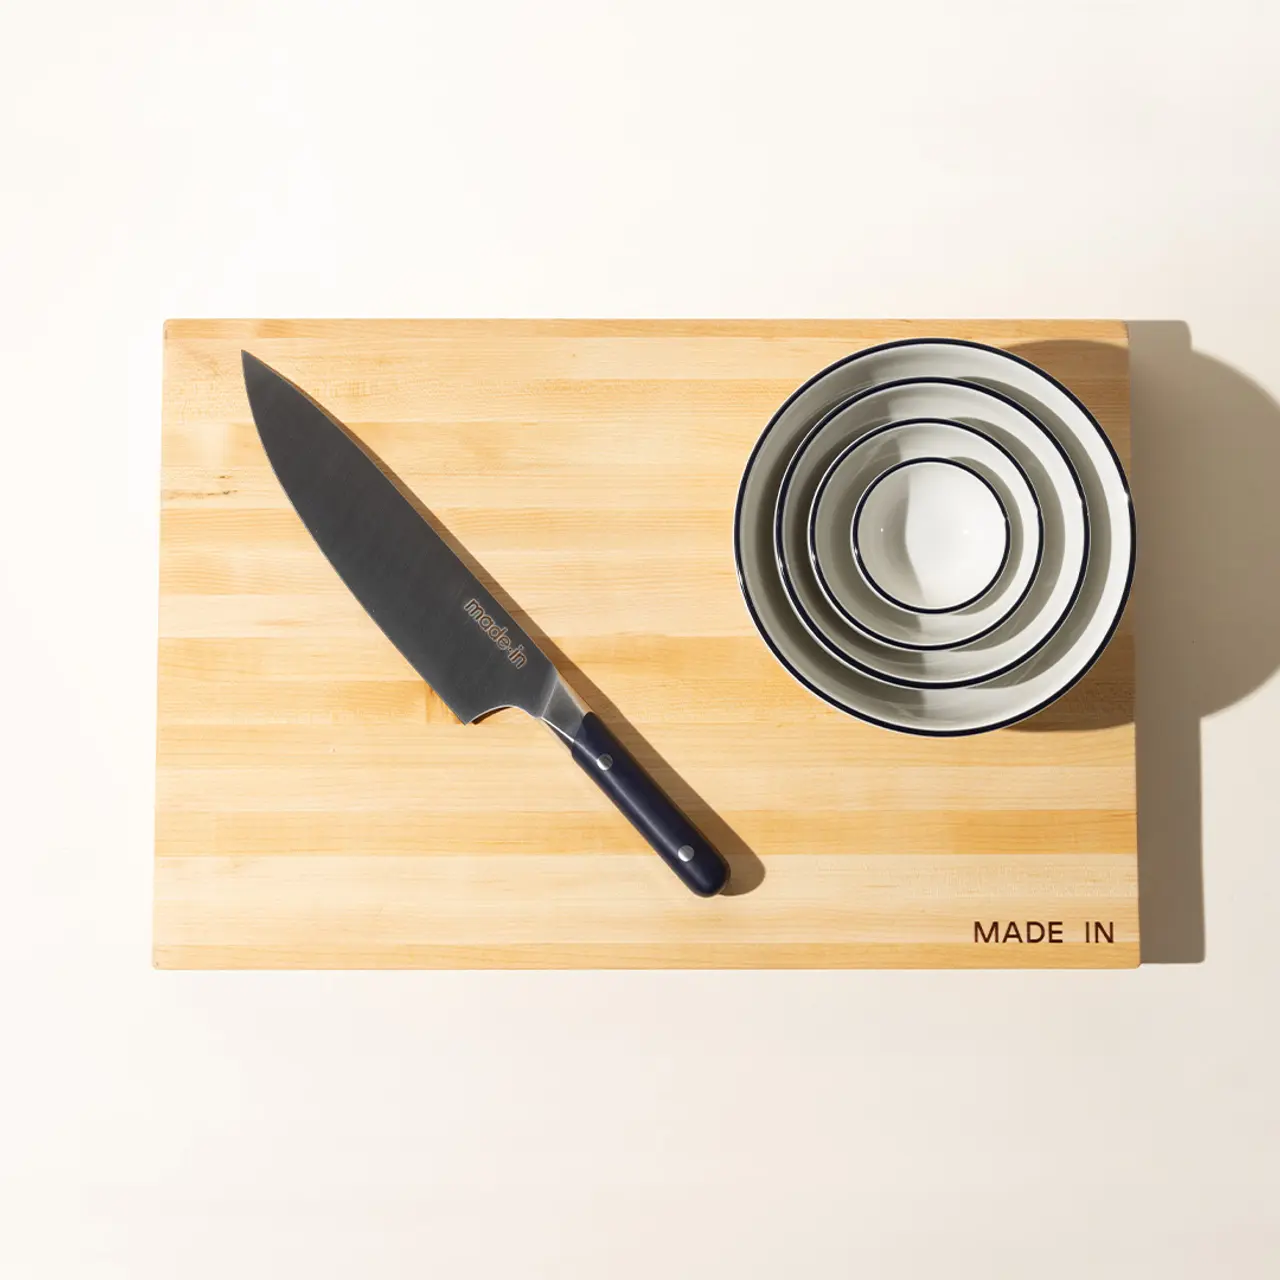 A chef's knife lies to the left of a stack of nested metal bowls on a wooden cutting board with the text "MADE IN" visible.